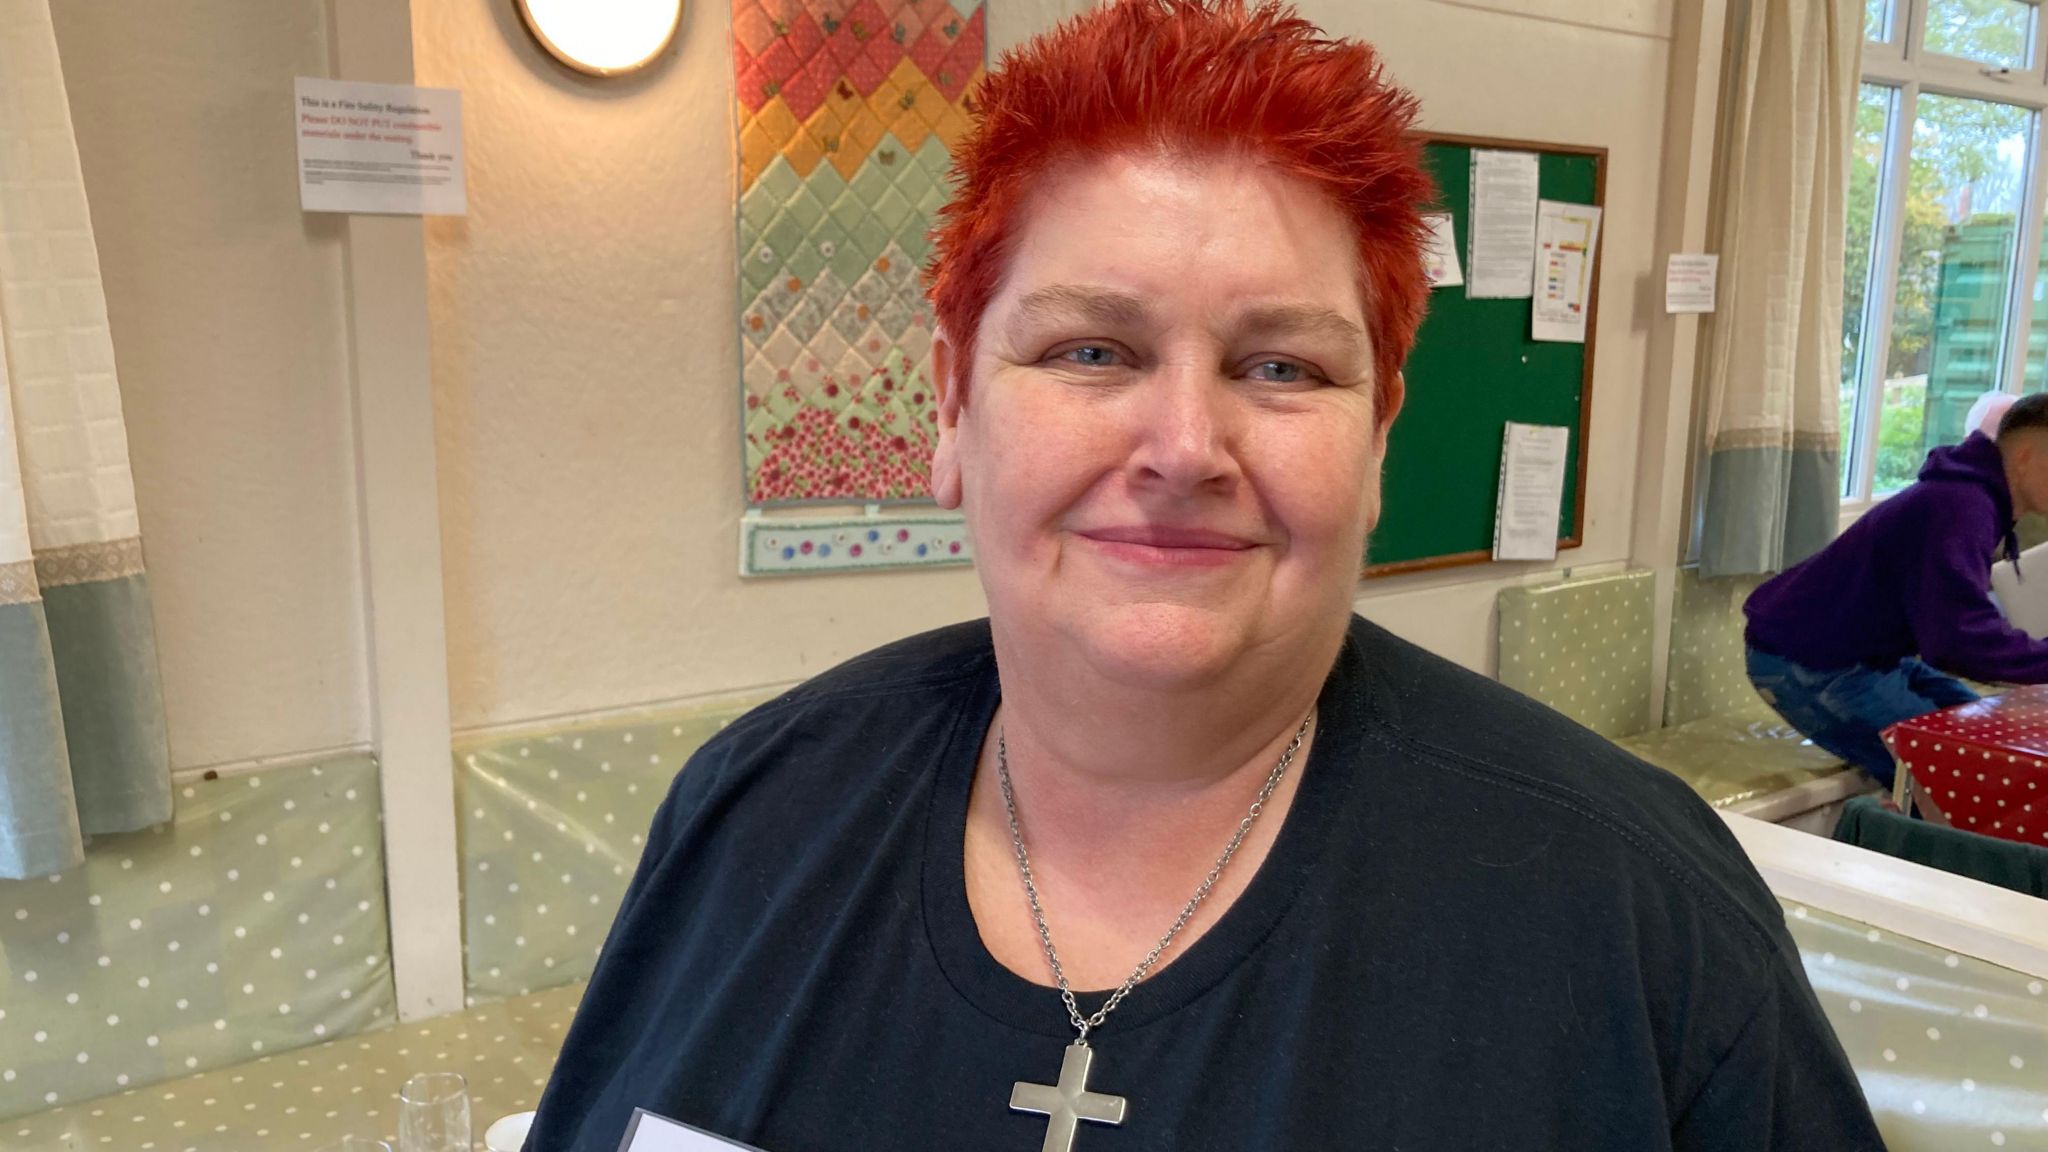 Volunteer Heather Windows with very short red hair wearing a cross and a dark top in a hall smiling at the camera